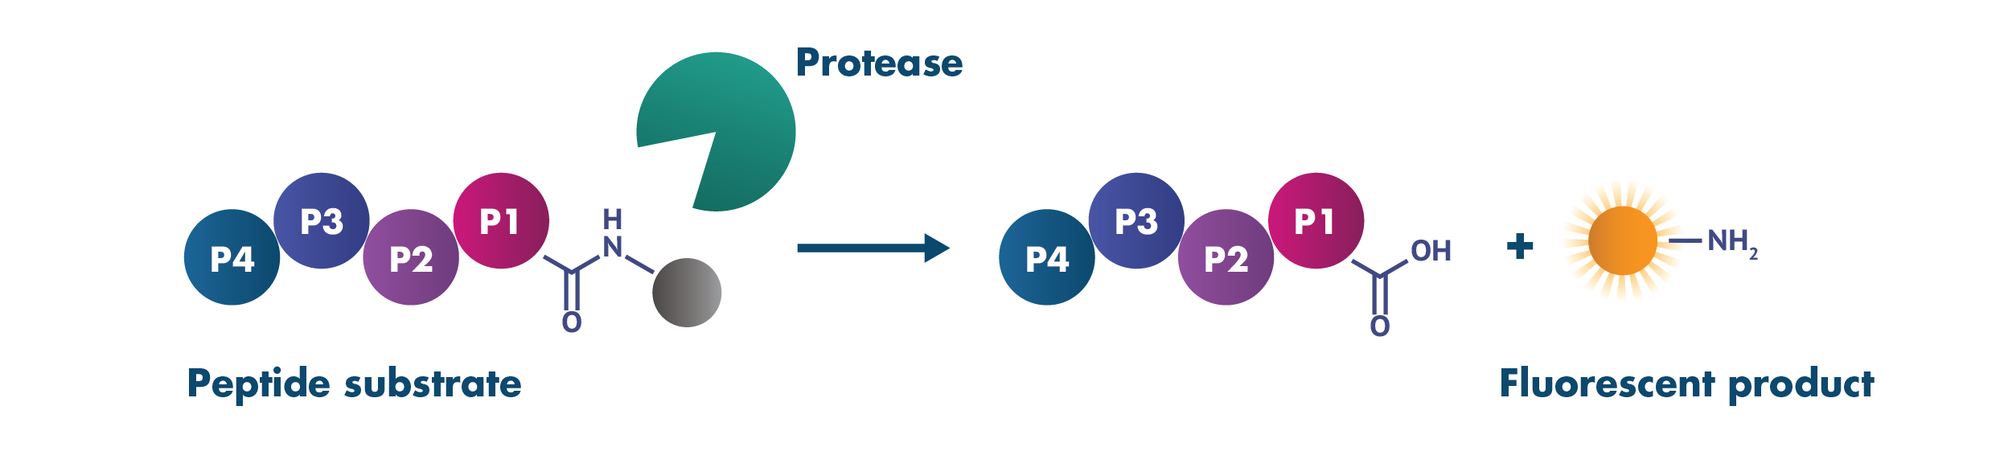 protease inhibitor screening on quenched peptide